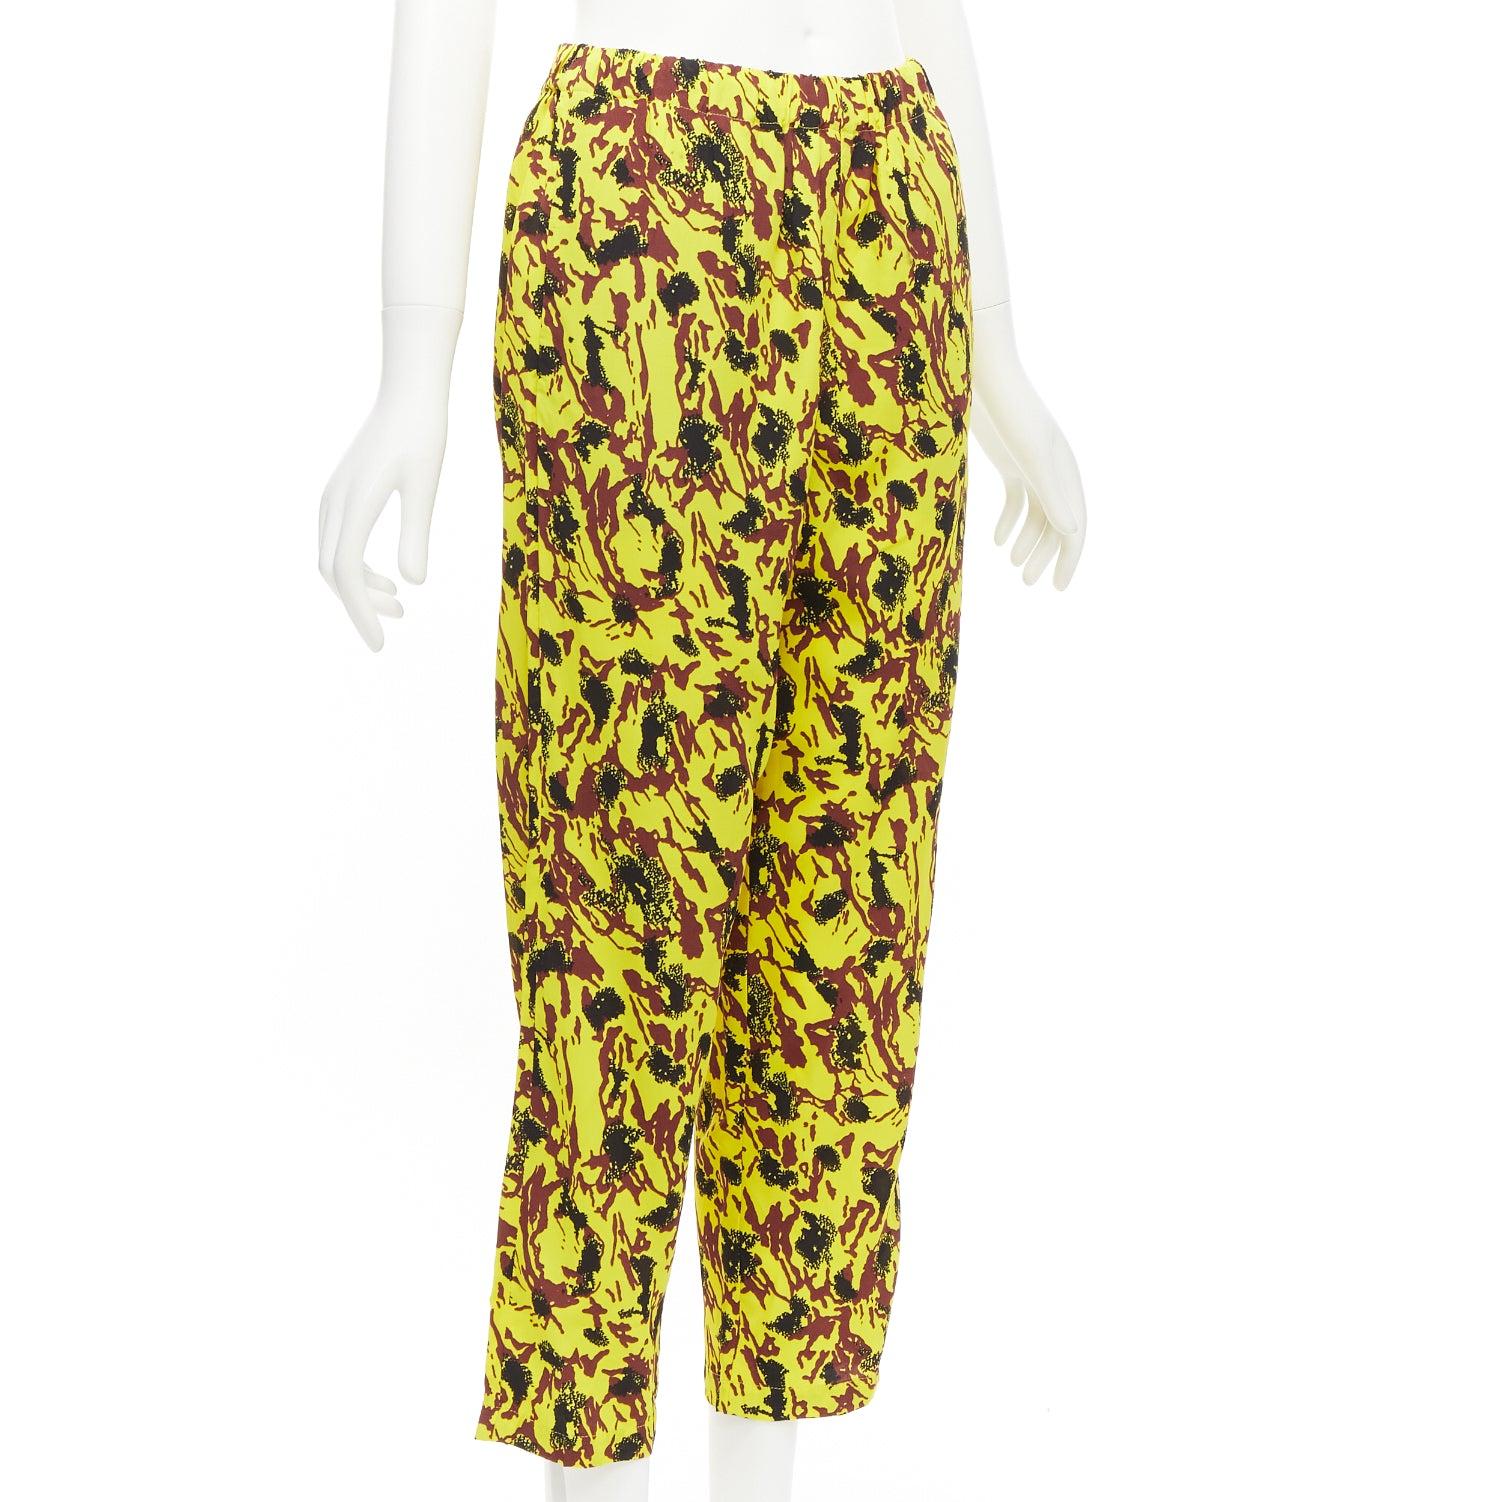 MARNI yellow burgundy black abstract print drop crotch tapered pants IT40 S
Reference: CELG/A00251
Brand: Marni
Material: Viscose
Color: Yellow, Multicolour
Pattern: Abstract
Closure: Elasticated
Made in: Portugal

CONDITION:
Condition: Good, this